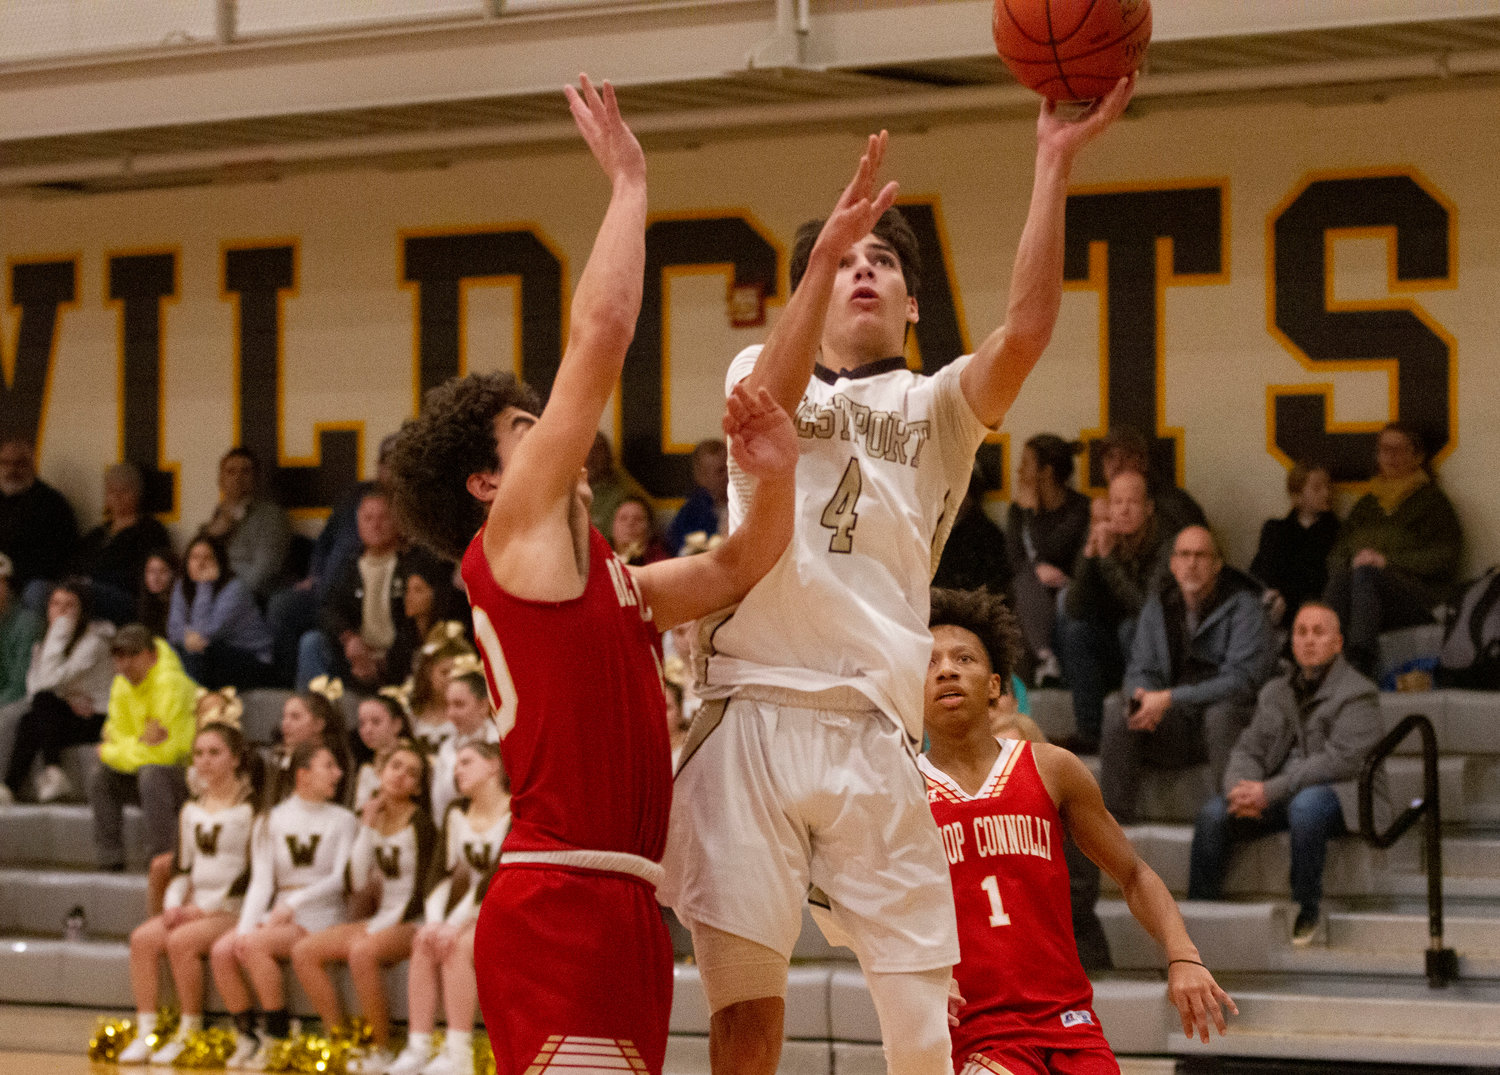 Owen Boudria scored 16 of his game high 25 points in the second half. The sinewy sophomore drained three 3-pointers and consistently found ways to drive to the hoop.